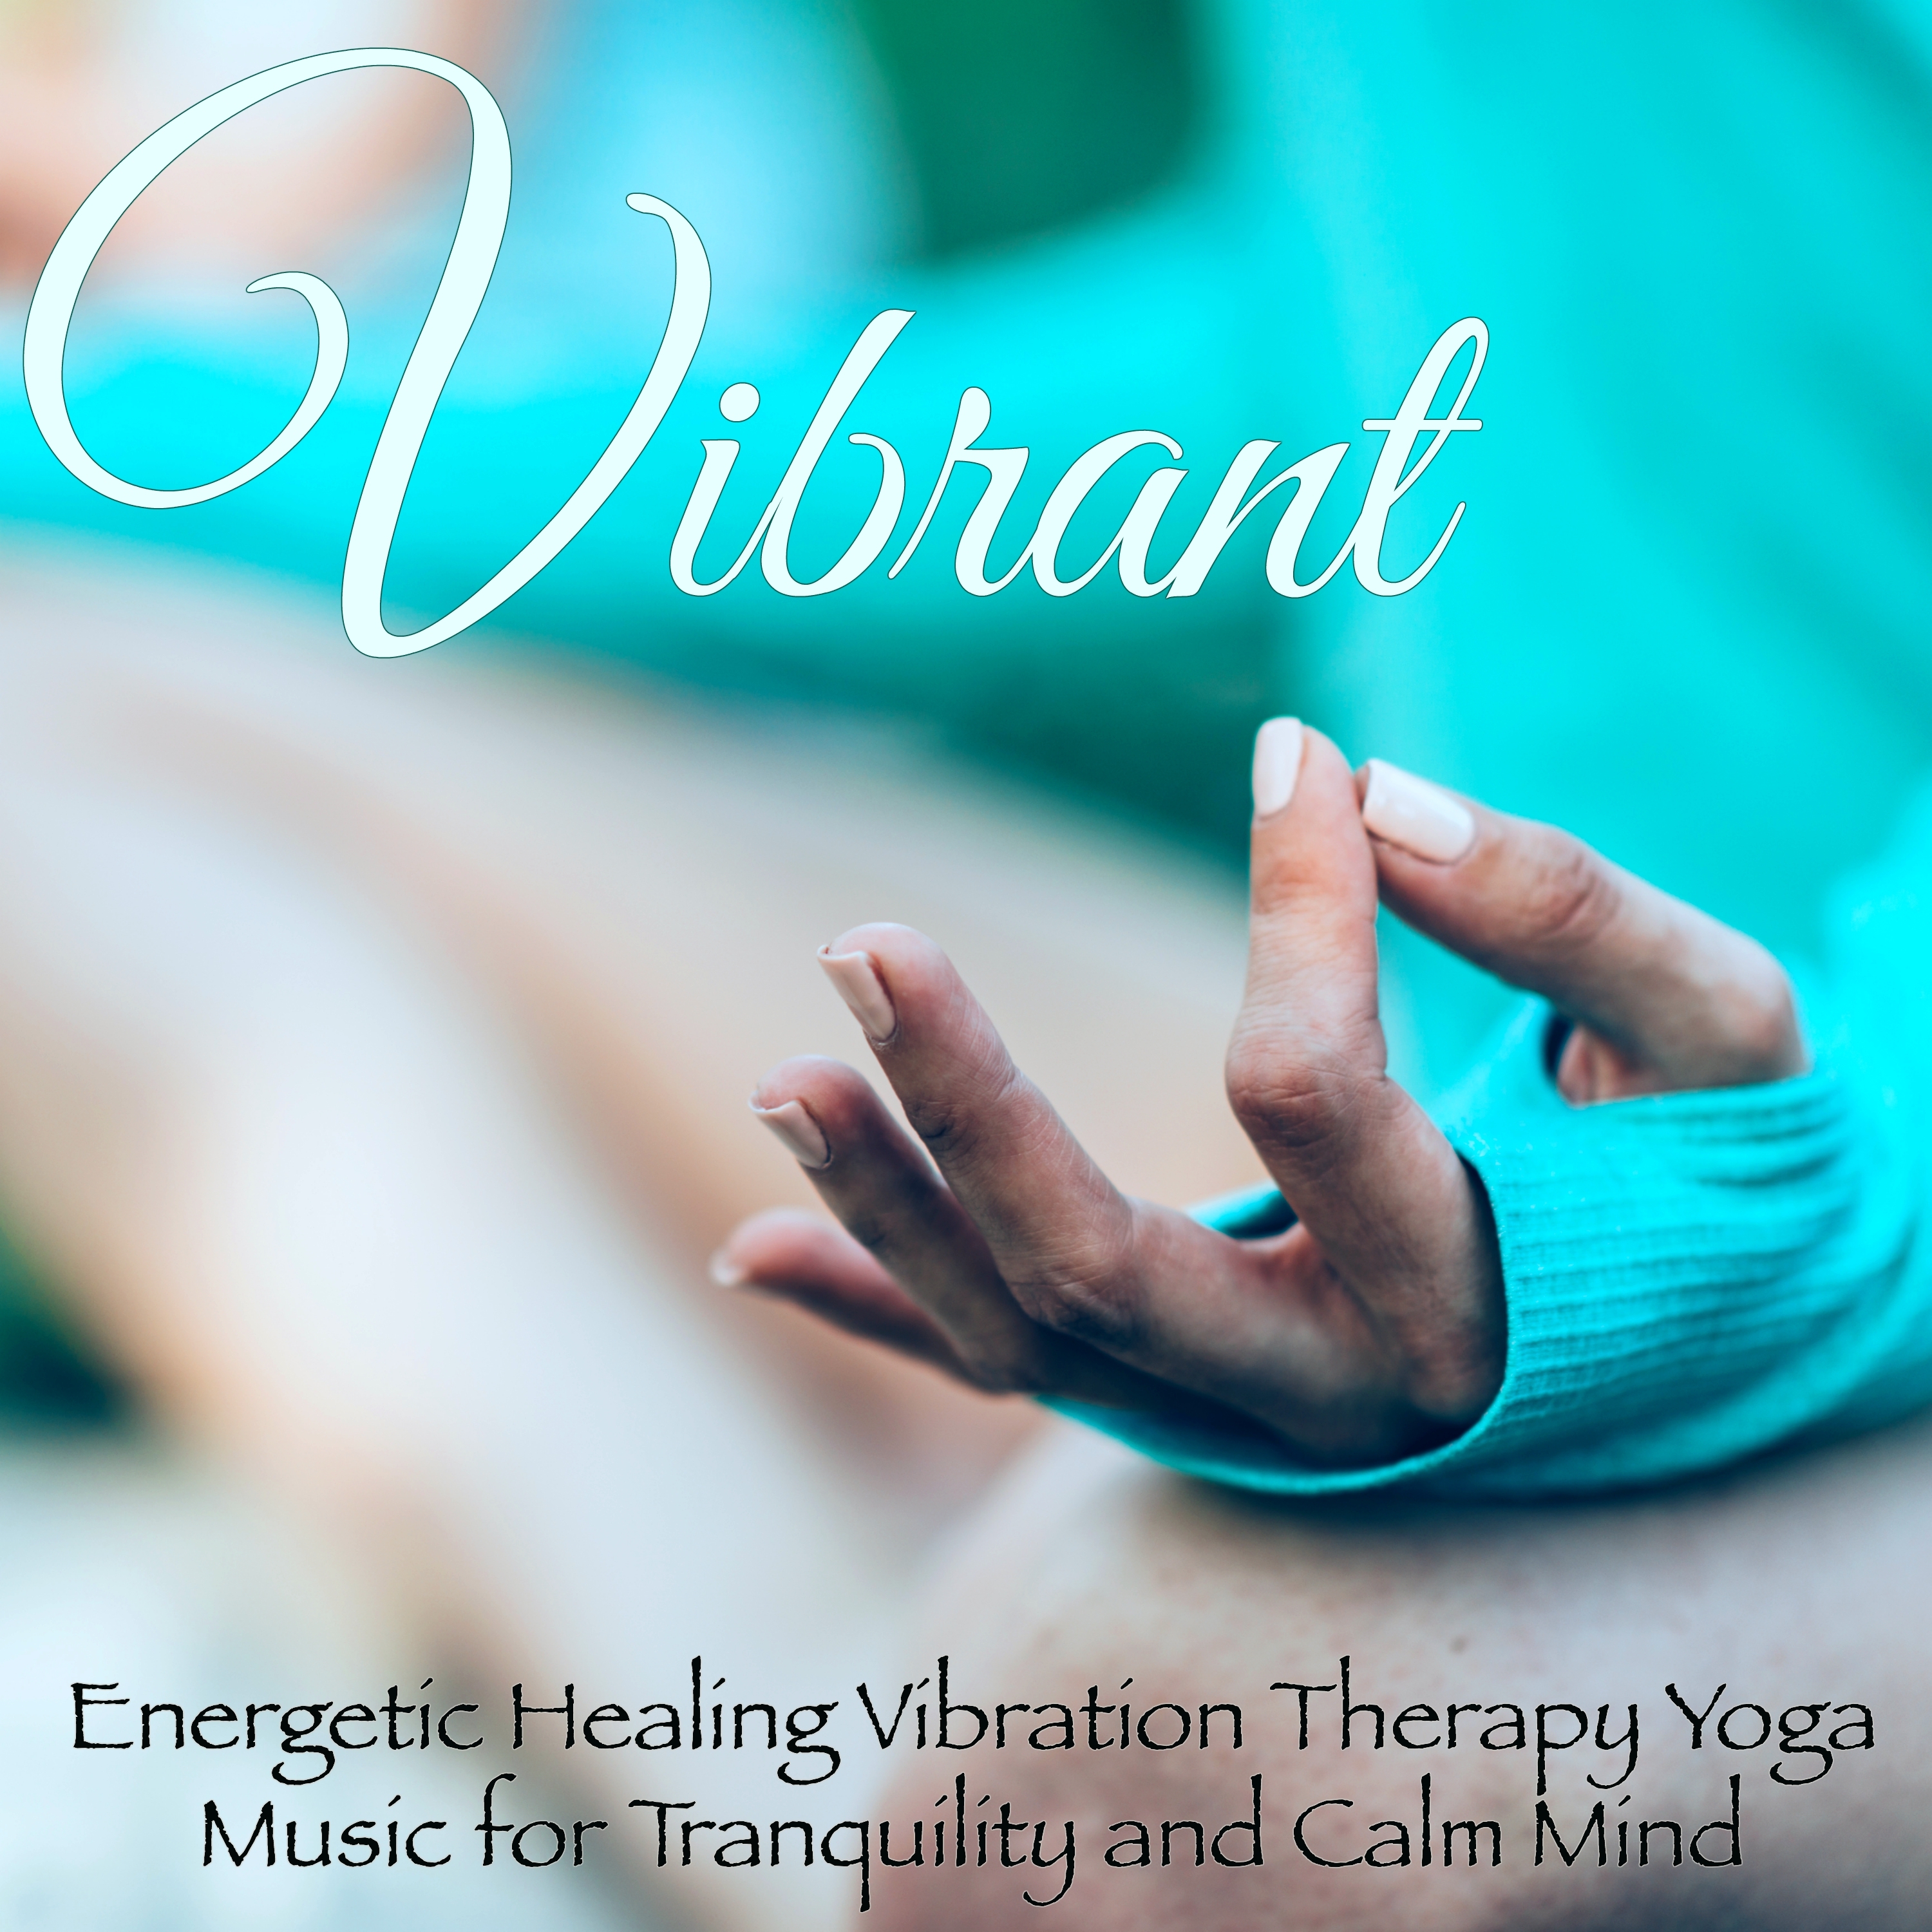 Vibrant  Energetic Healing Vibration Therapy Yoga Music for Tranquility and Calm Mind